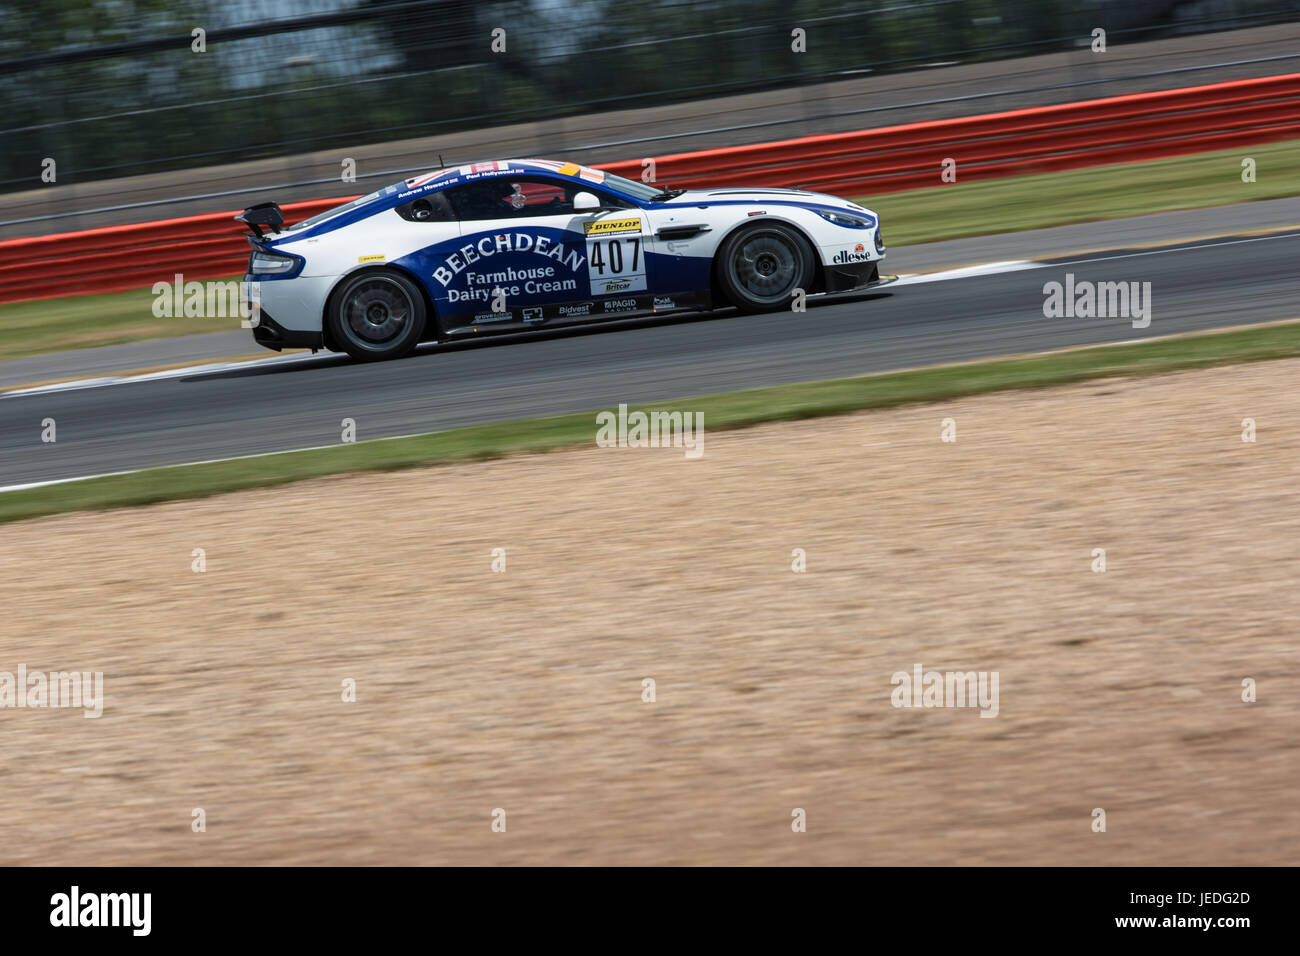 Silverstone, UK. 24th June, 2017. Paul Hollywood racing in Britcar with Beechdean Motorsport in an Aston Martin Vantage GT4 Credit: steven roe/Alamy Live News Stock Photo